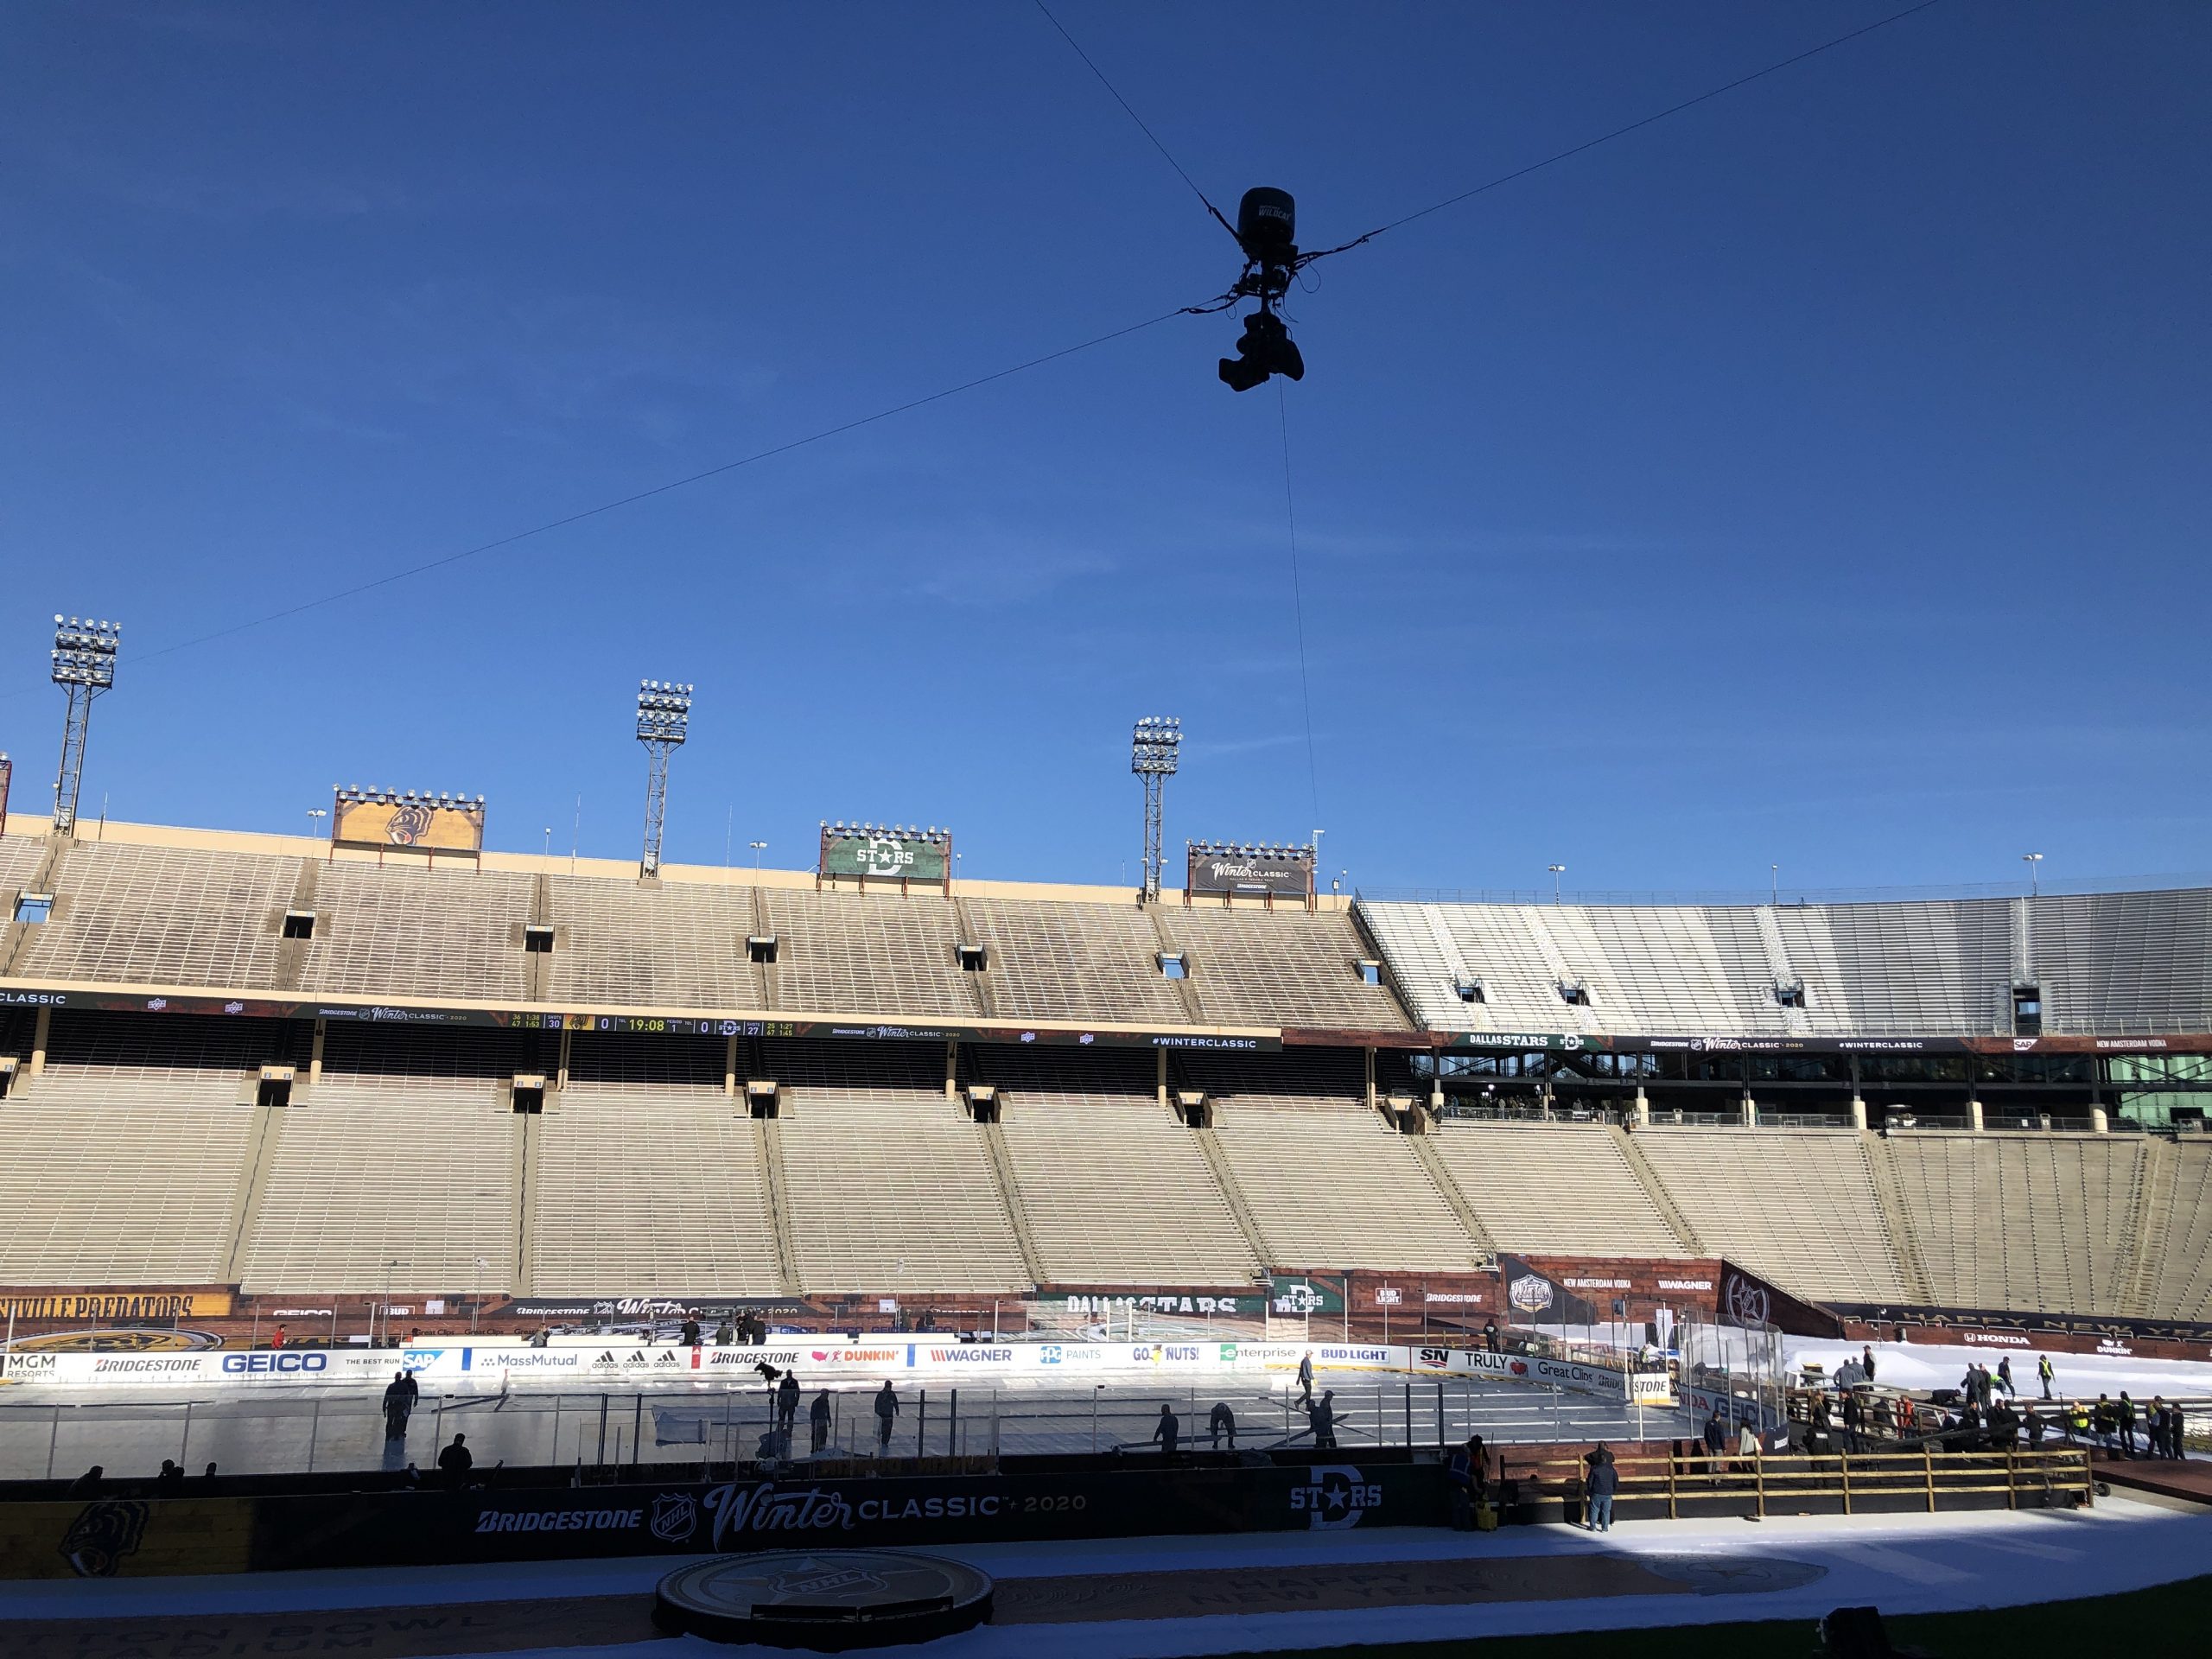 Live From Winter Classic Skycam Reaps The Benefits Of Spacious Familiar Venue